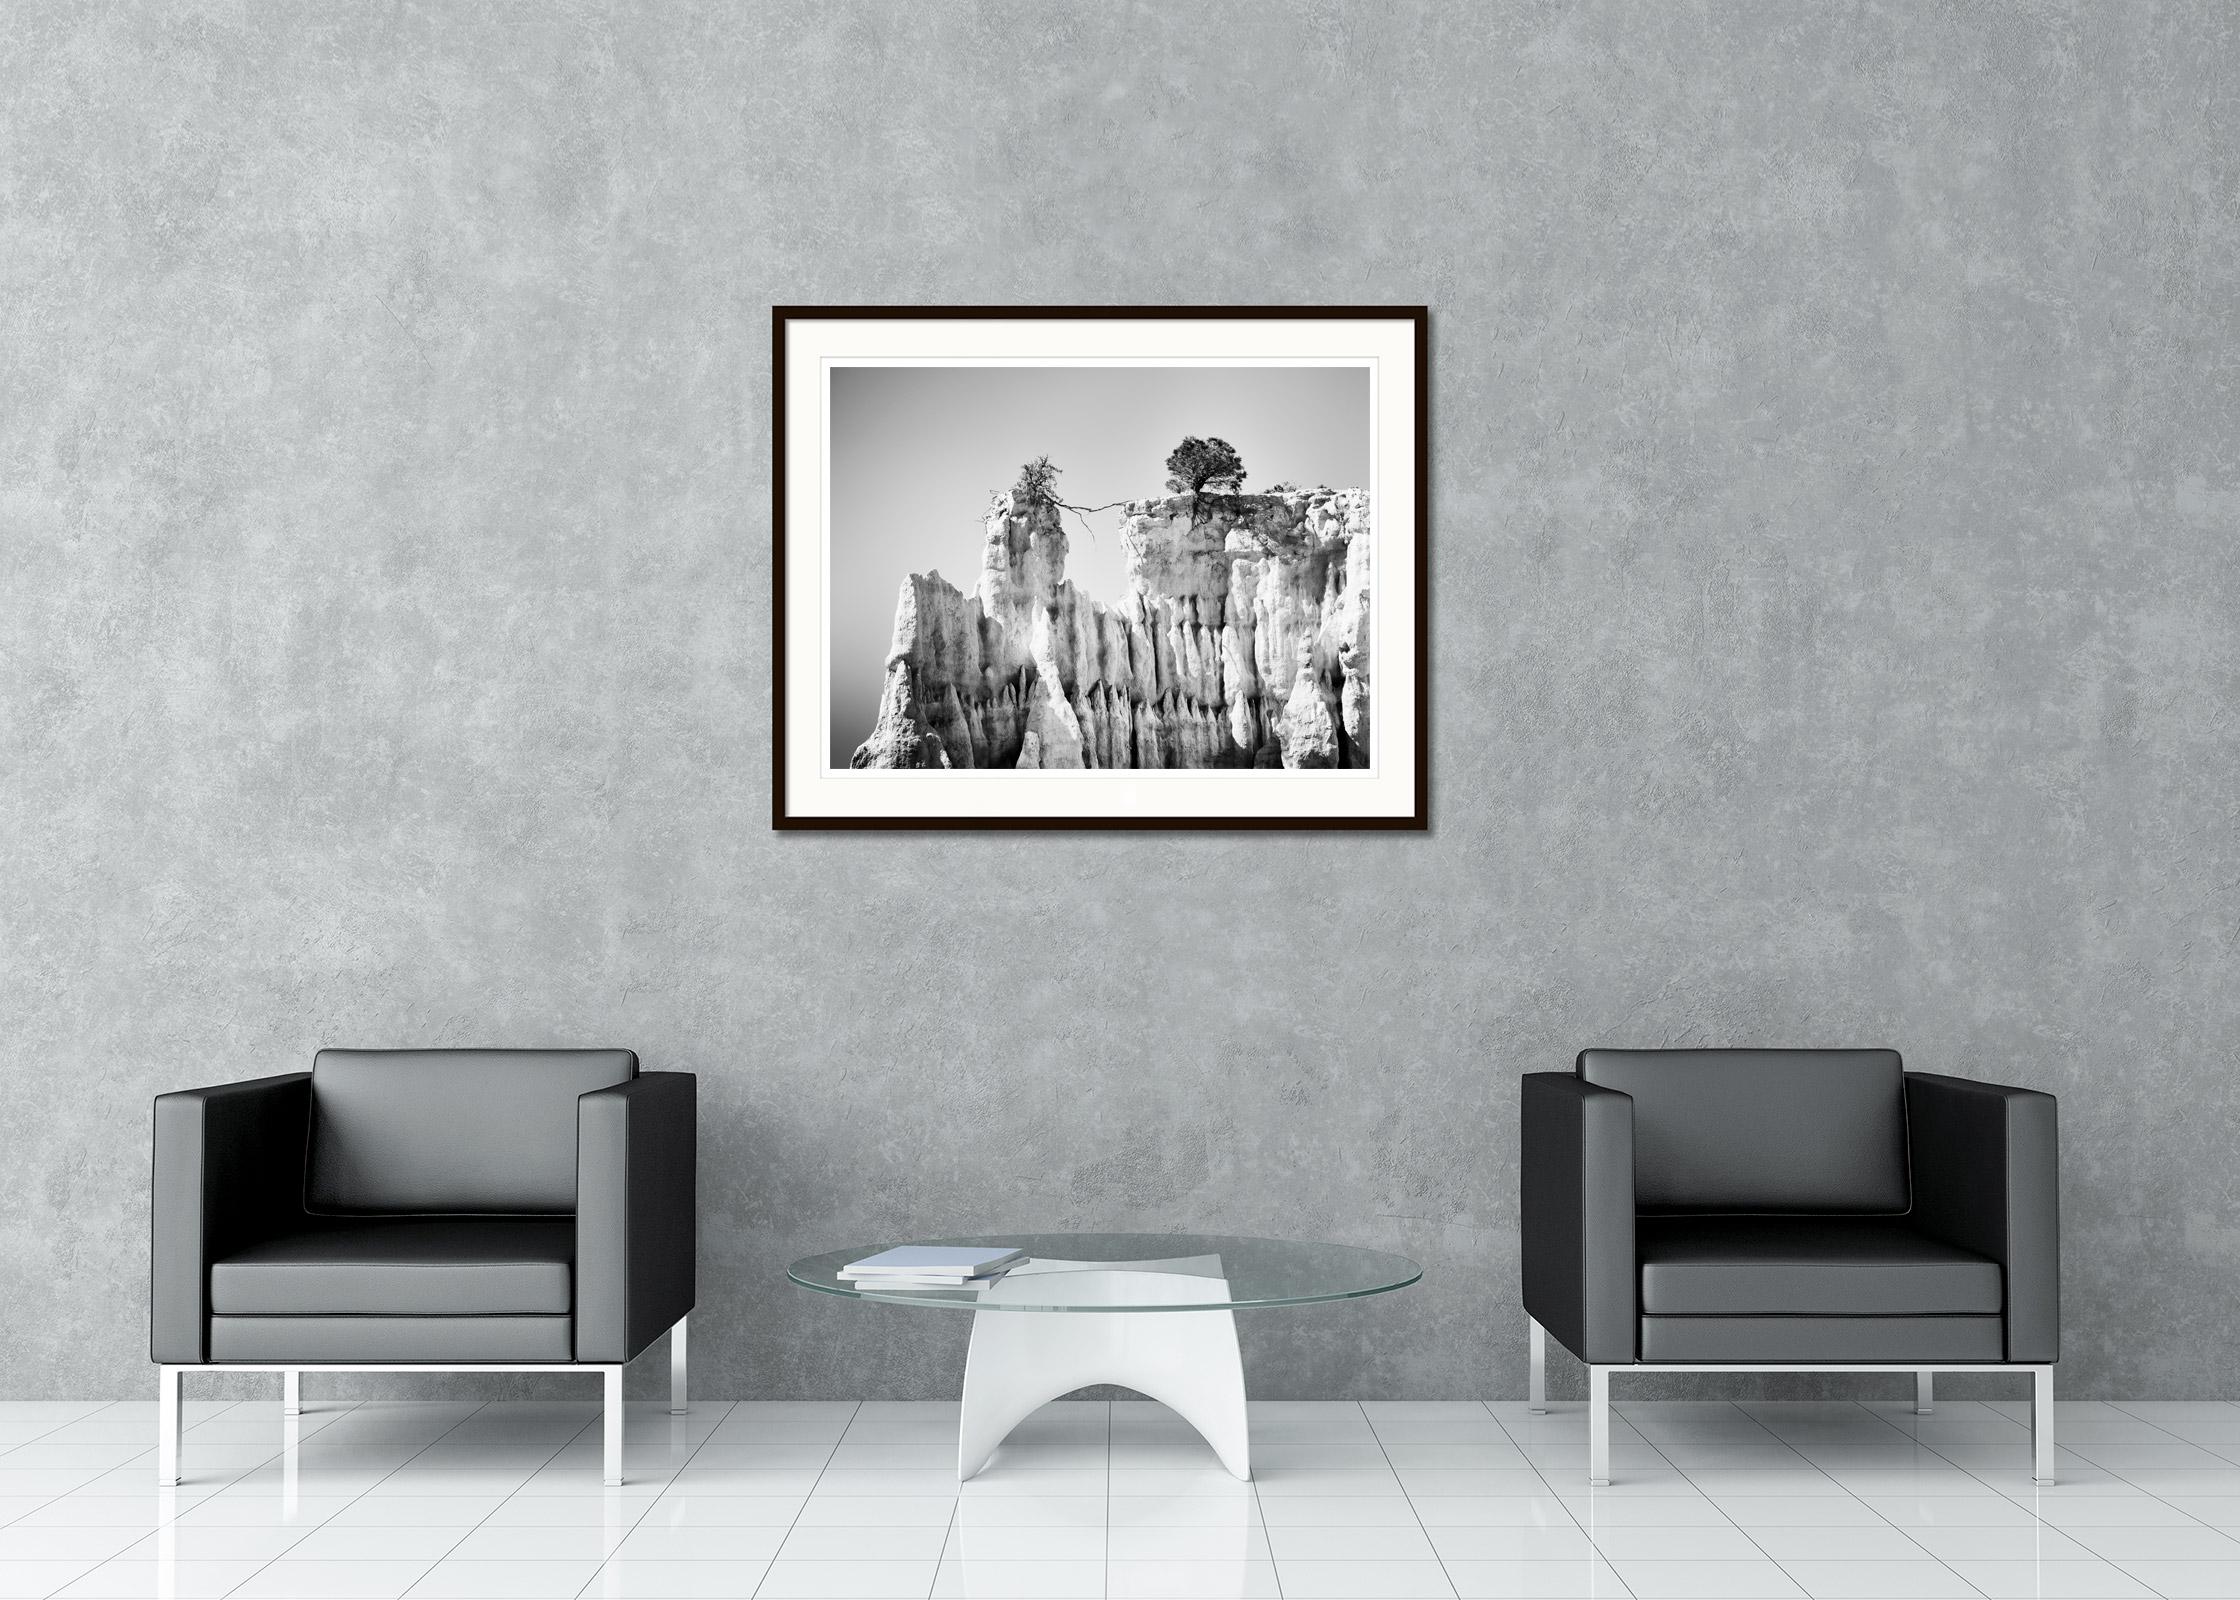 Black and White fine art landscape photography. The Orgues of Ille Sur Tet Columns of Soft Rock Geologic Natural French Organs in South France. Archival pigment ink print, edition of 8. Signed, titled, dated and numbered by artist. Certificate of